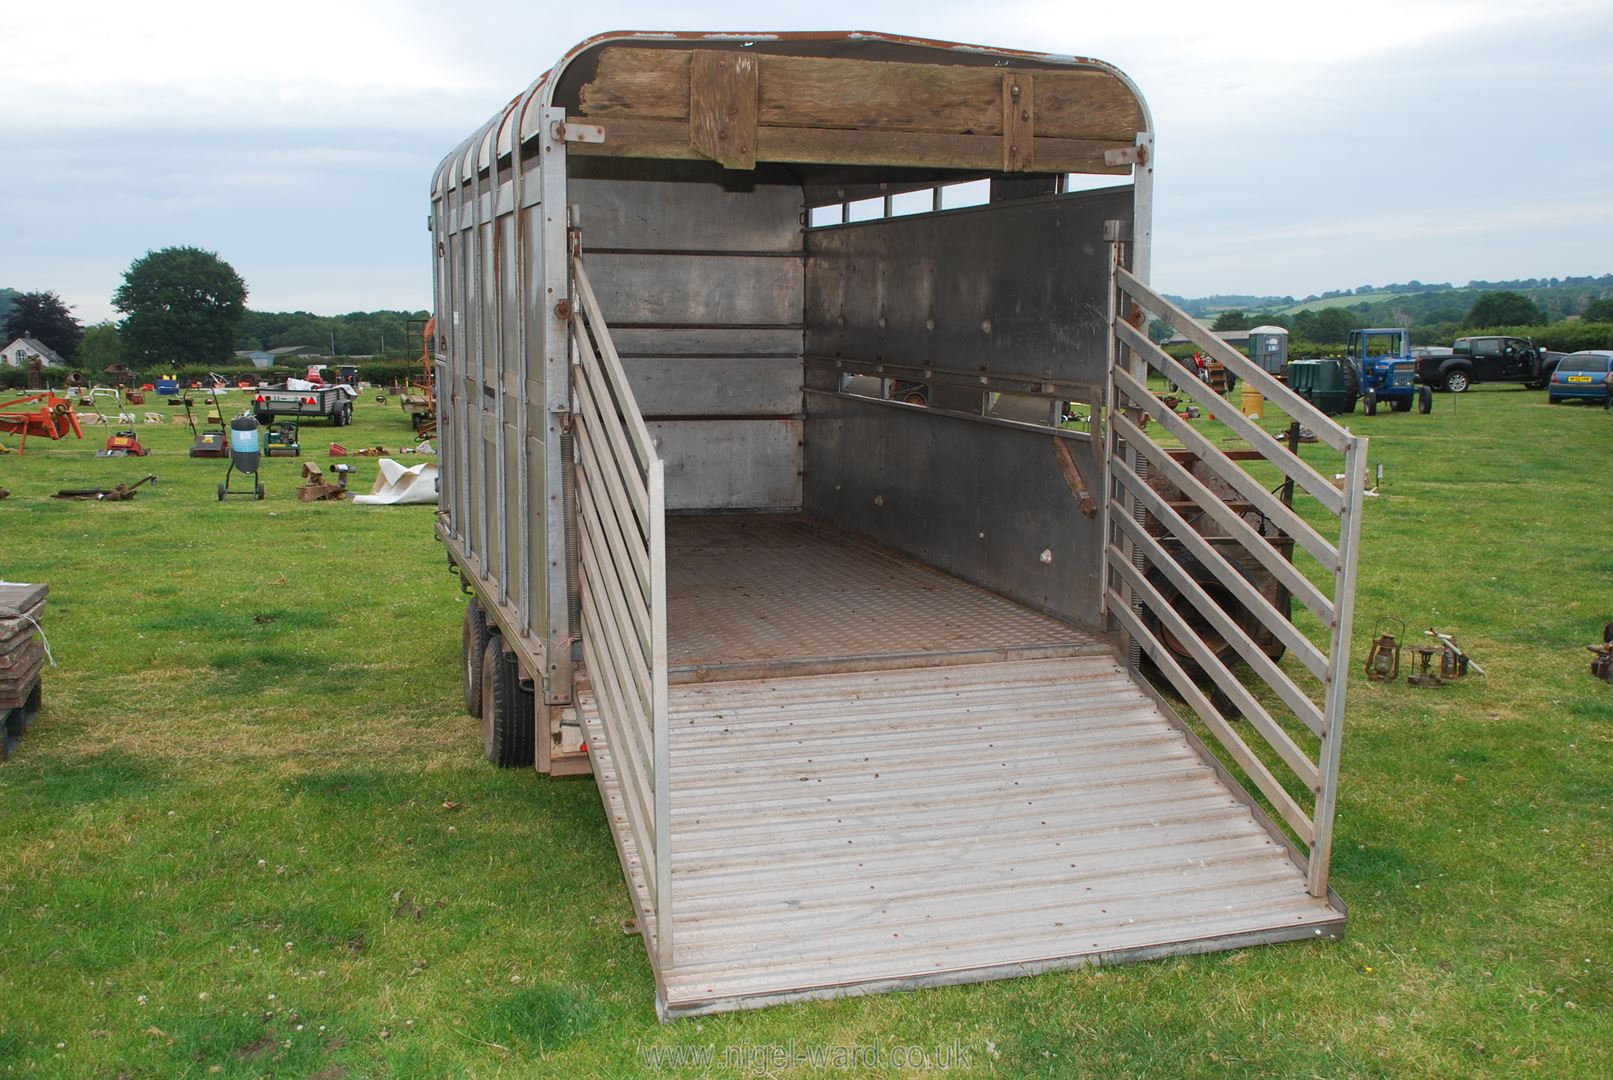 An Ifor Williams twin axle stock Trailer with chequer plate floor, loading gates present. - Image 2 of 2